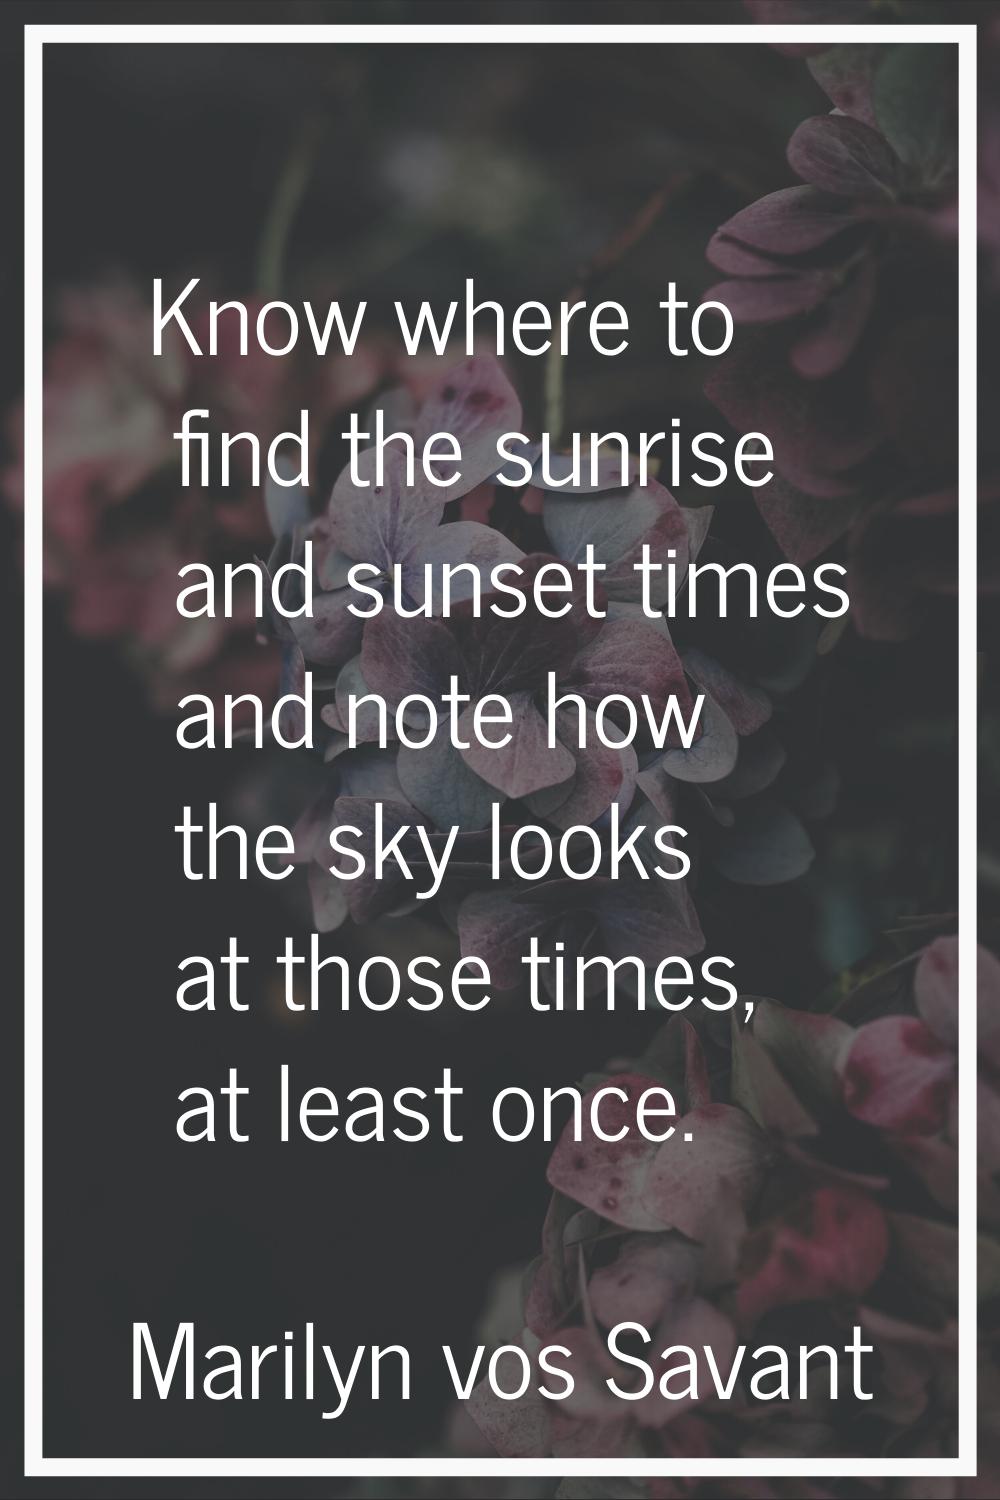 Know where to find the sunrise and sunset times and note how the sky looks at those times, at least